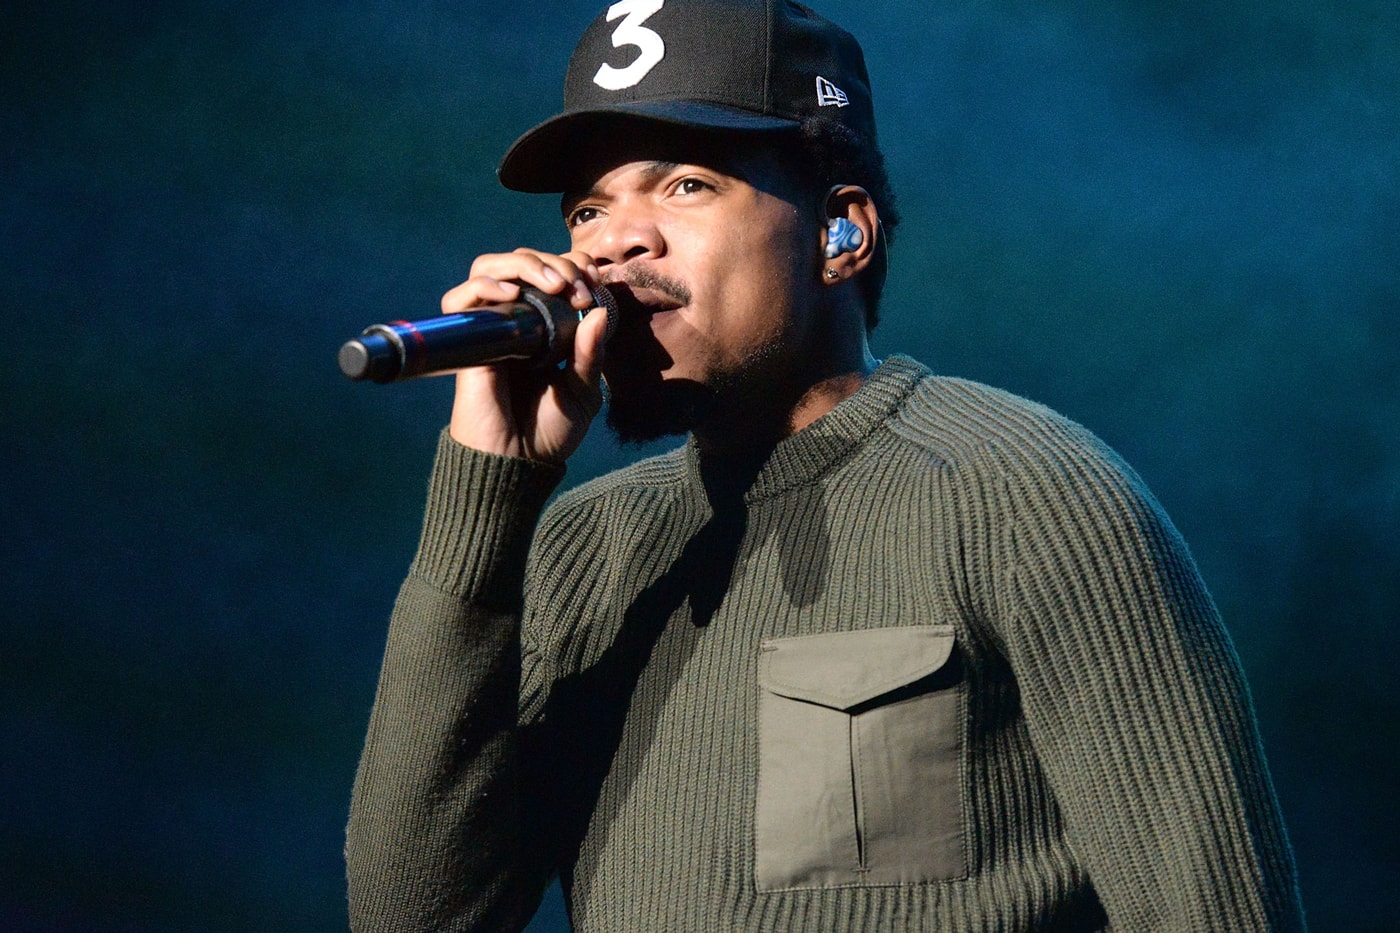 chance-the-rapper-becomes-the-first-artist-to-chart-for-streaming-only